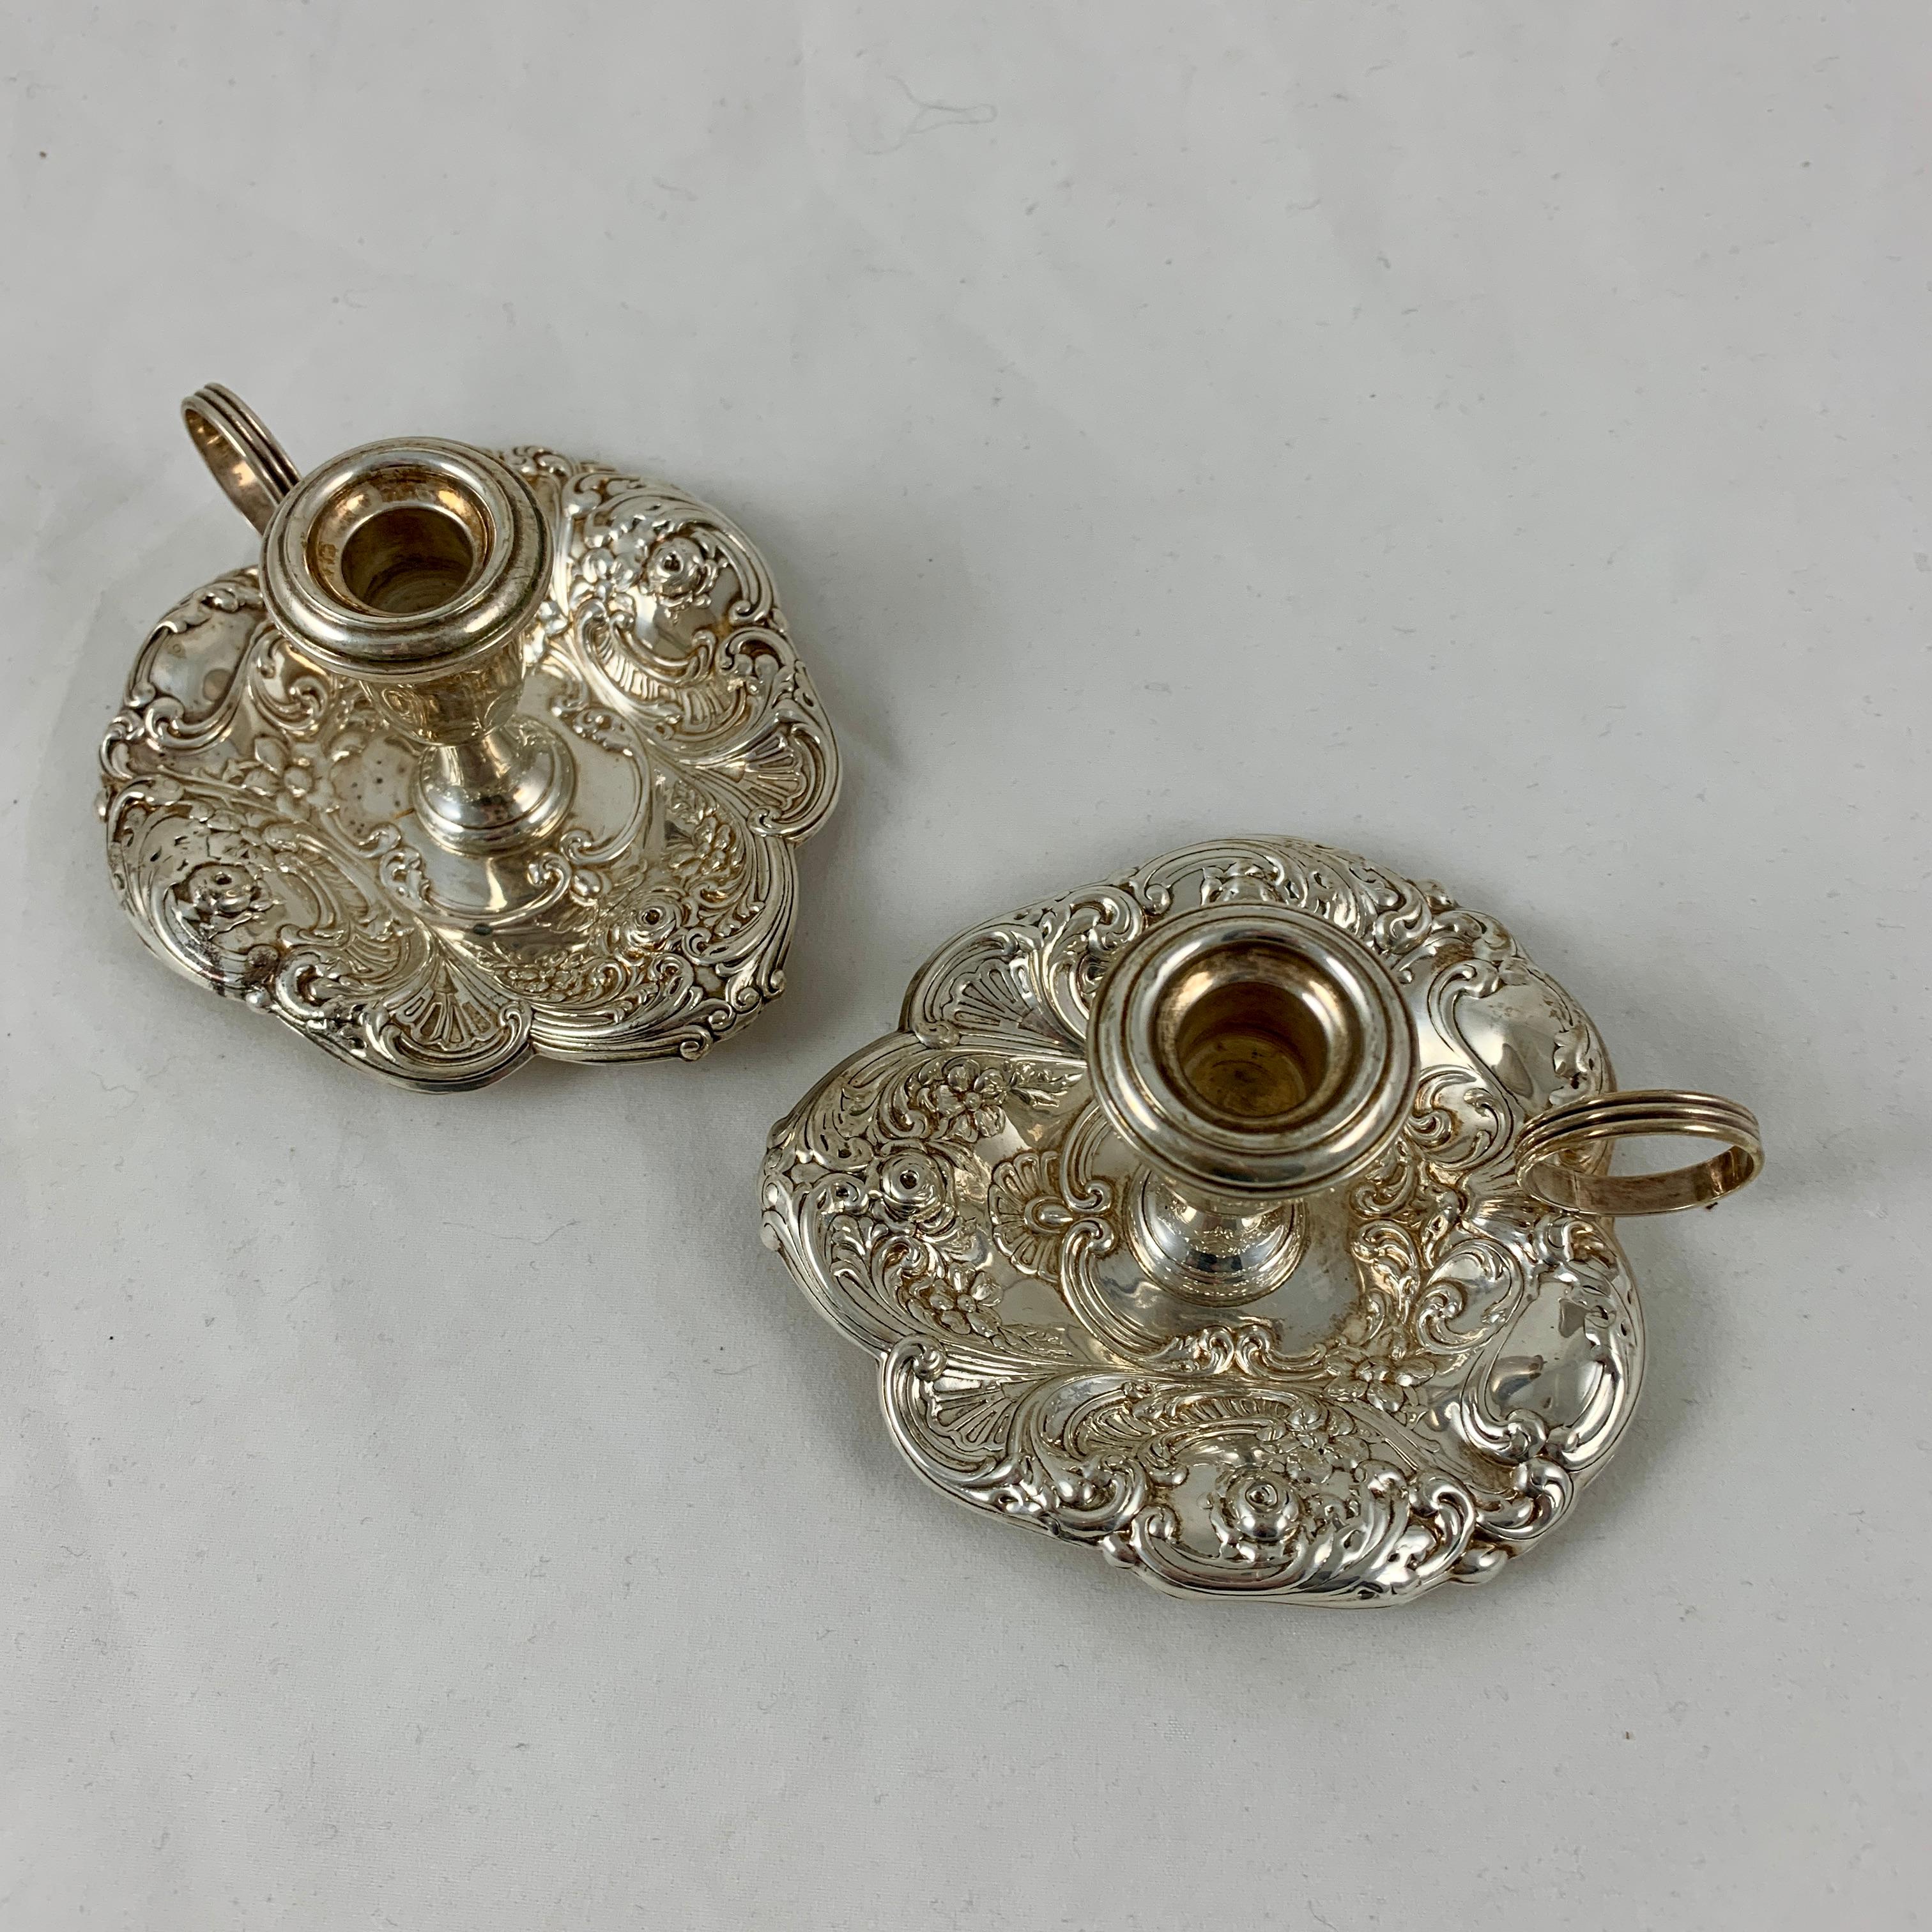 American Gorham Sterling Silver Floral Repoussé Chambersticks, circa 1920-1930, a Pair For Sale